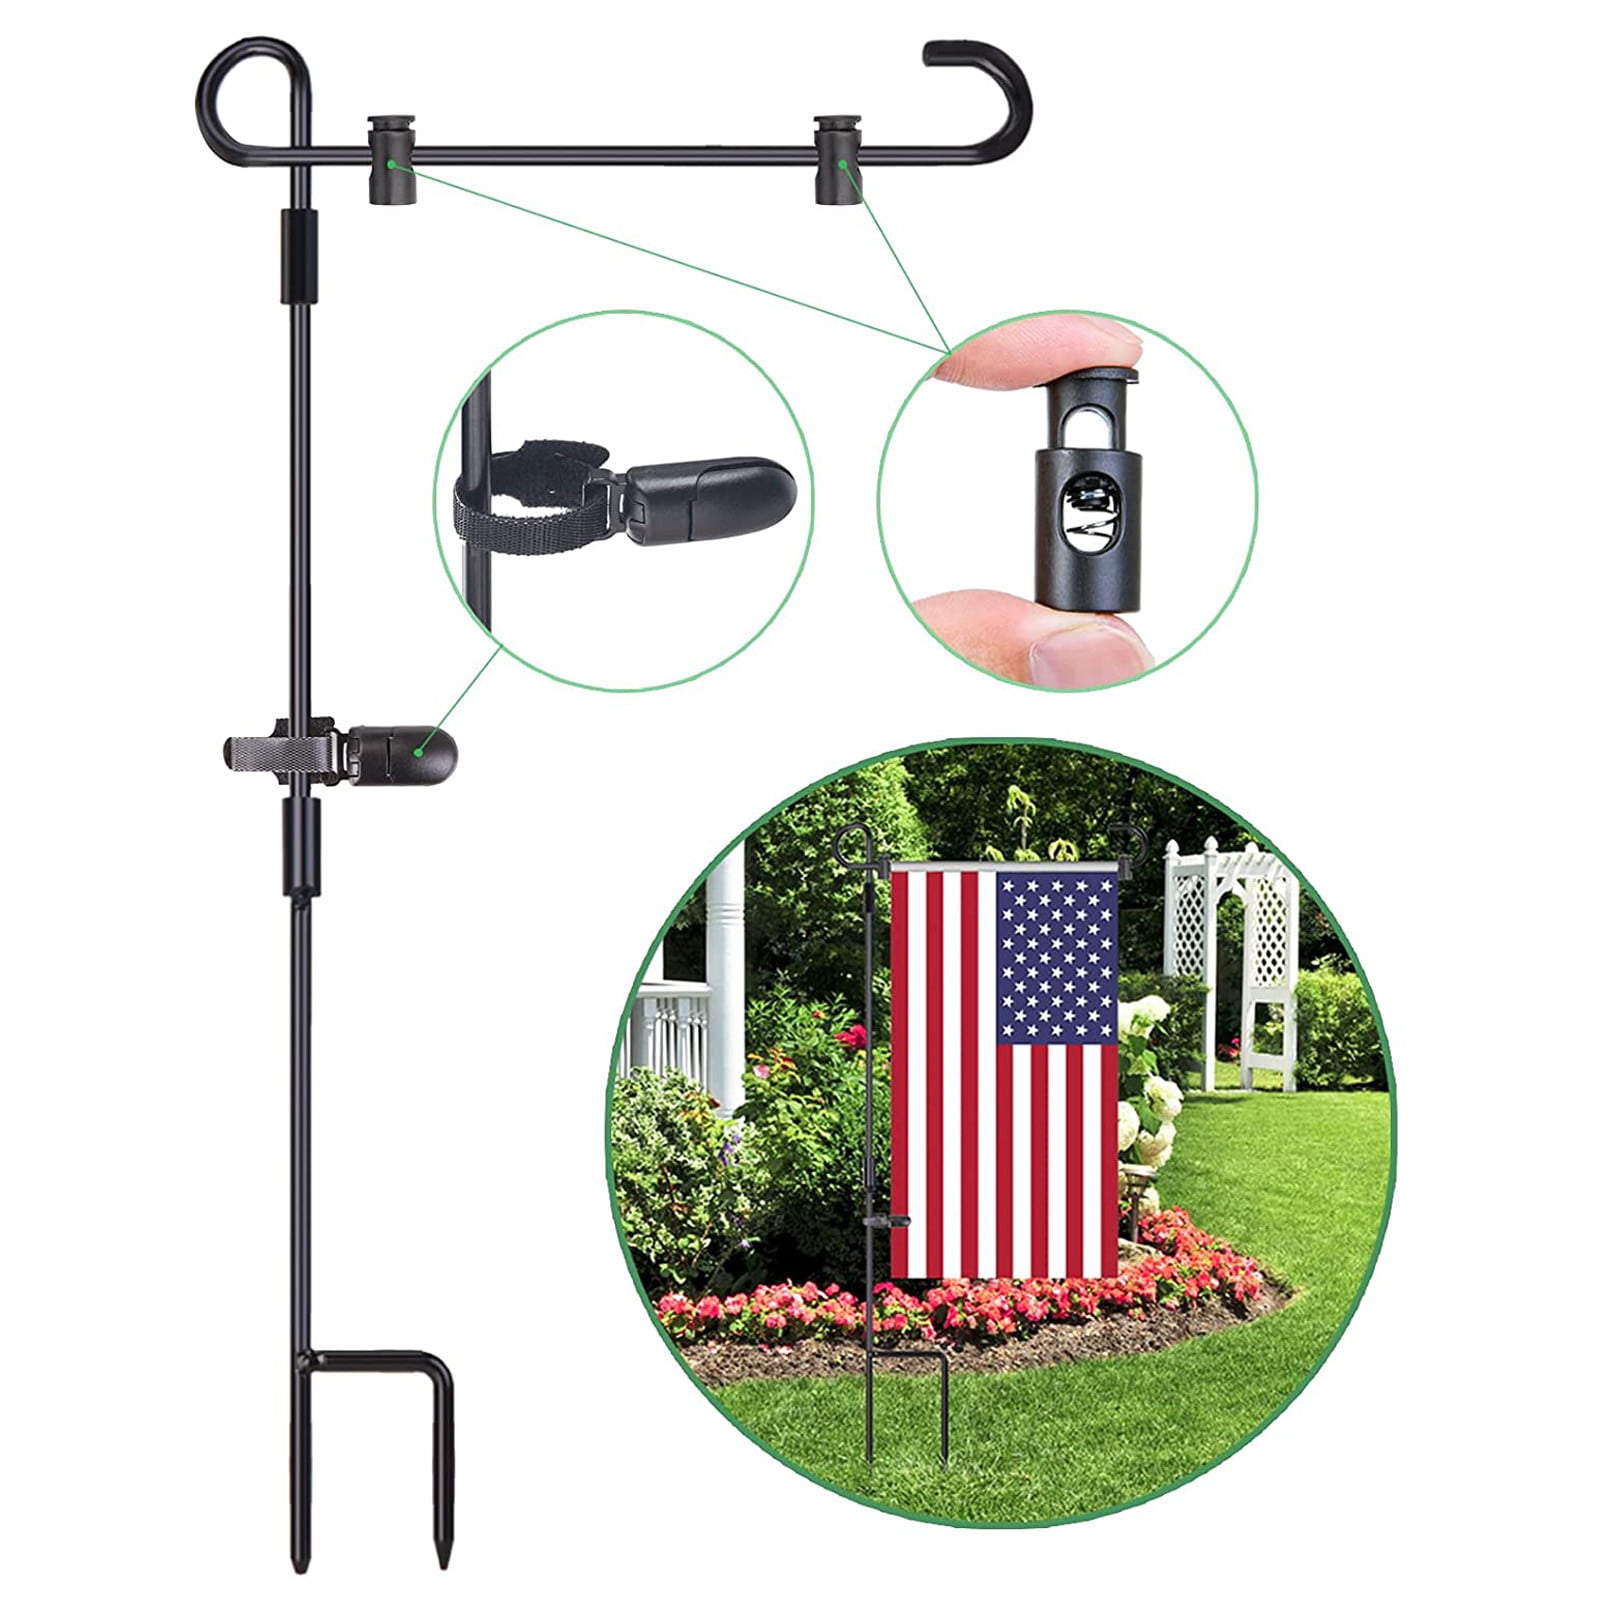 Garden Flag Stand with Garden Flag Premium Garden Flag Pole Holder Metal 36 H x 18 W with one Tiger Clip and Two Spring Stoppers with 12.5 x 18 American US Garden Flag 